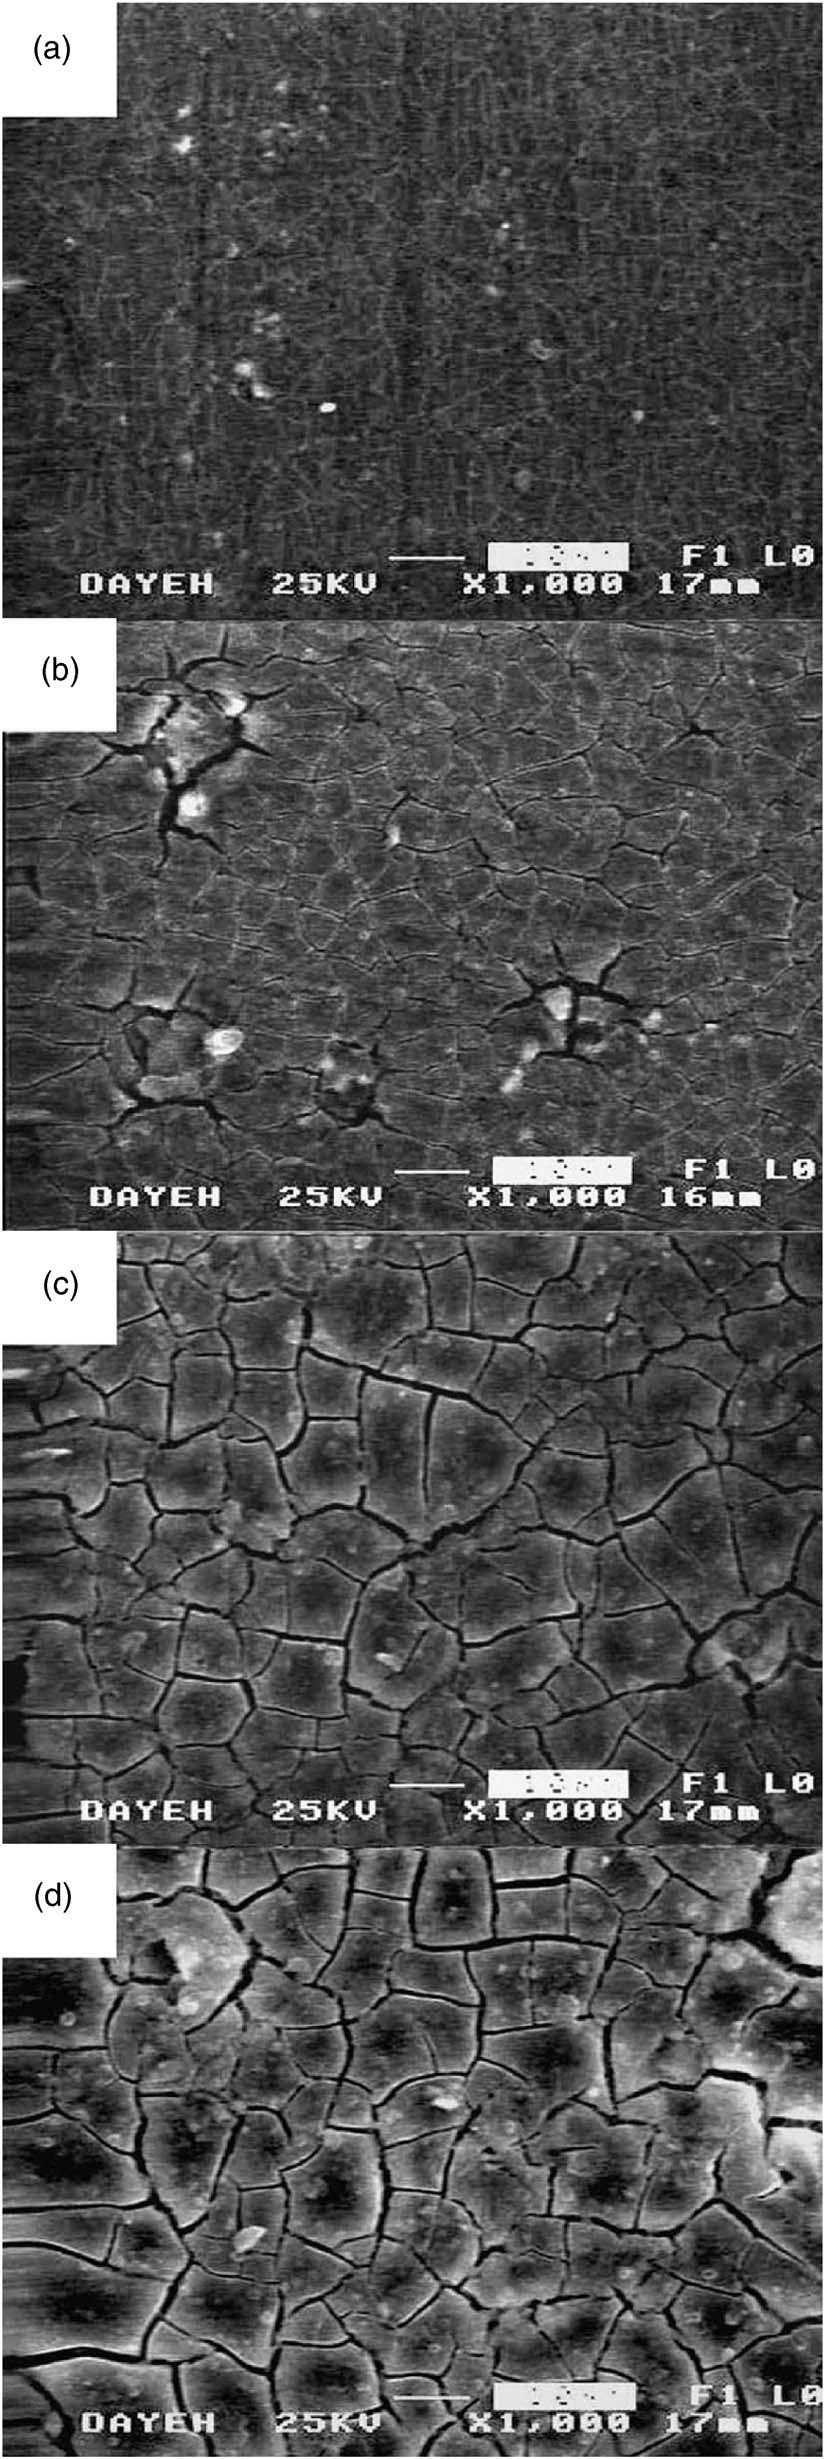 min resulted in thicker coating and larger microcracks having wider crack openings Fig. 1b. The coating continued to grow and larger microcracks formed with continued immersion, as shown in Fig.